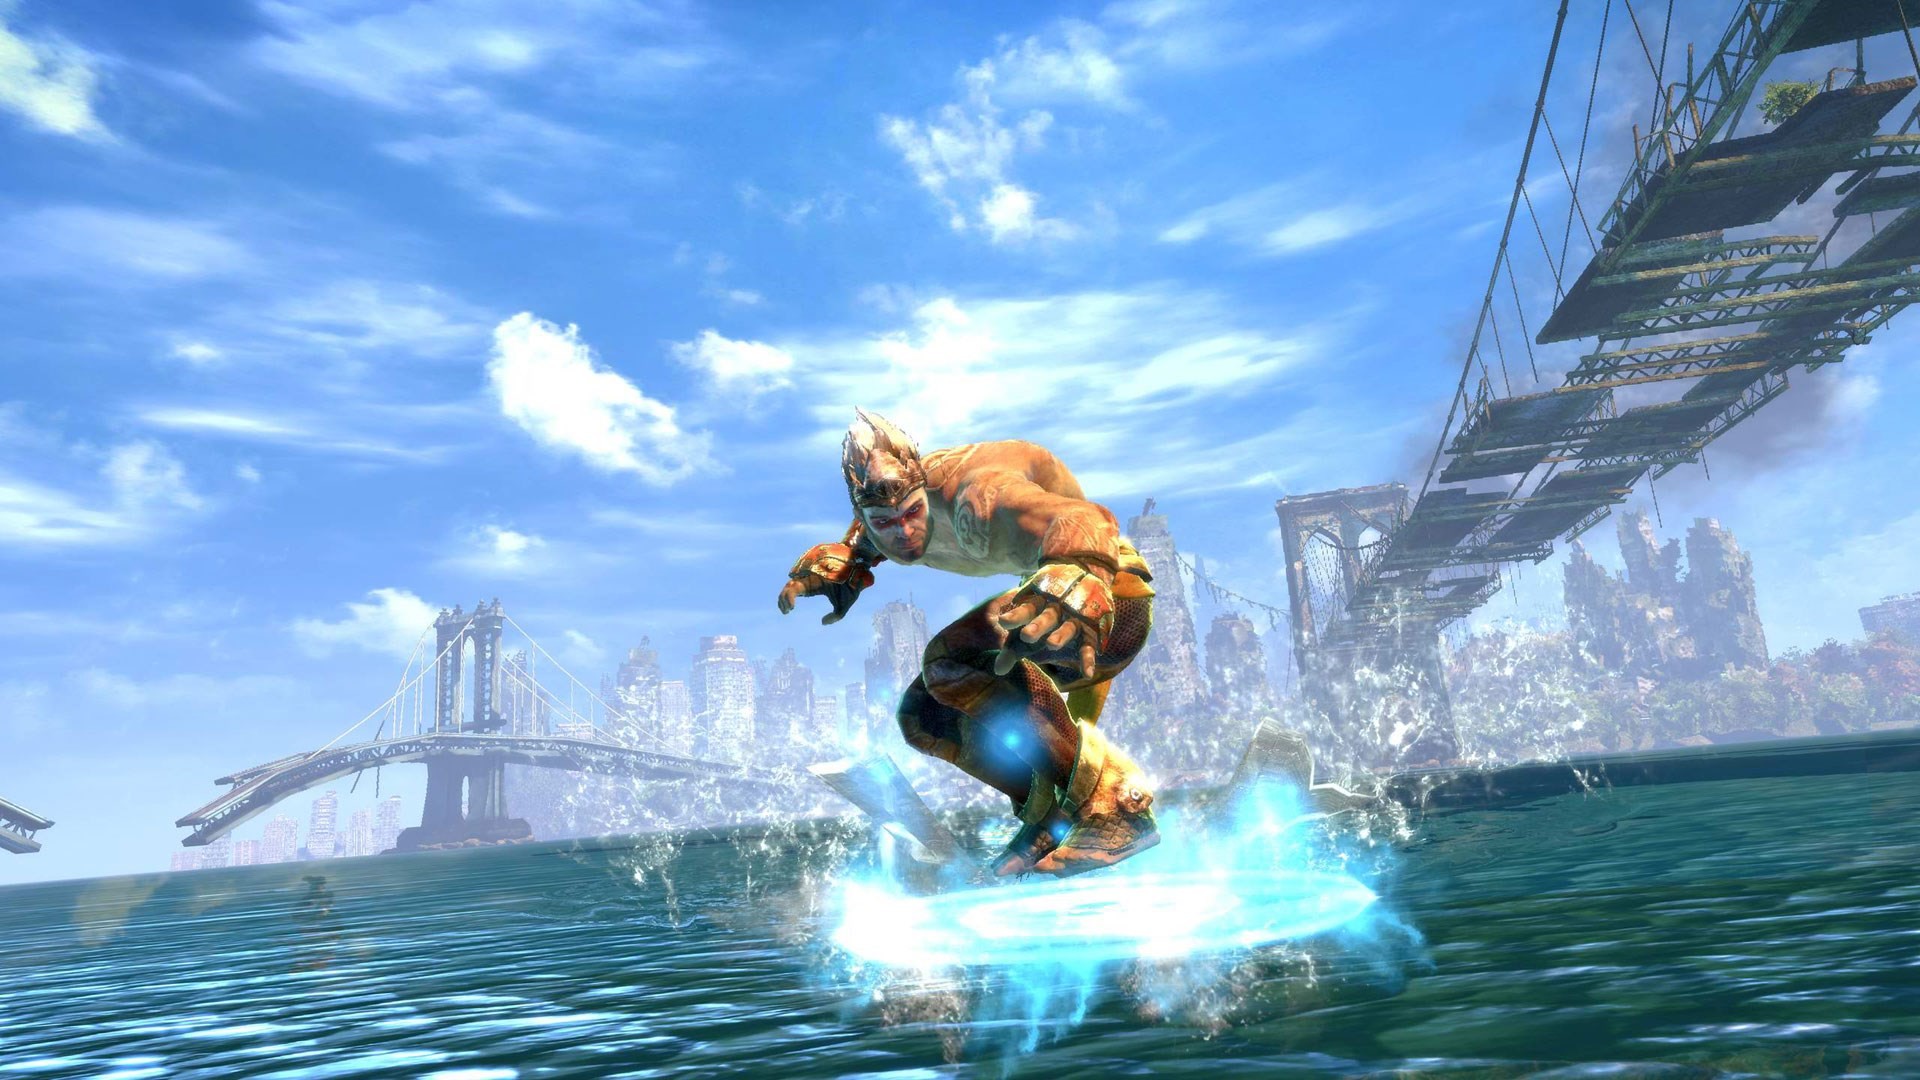 1920x1080 enslaved odyssey to the west backround - Full HD Backgrounds - enslaved  odyssey to the west category